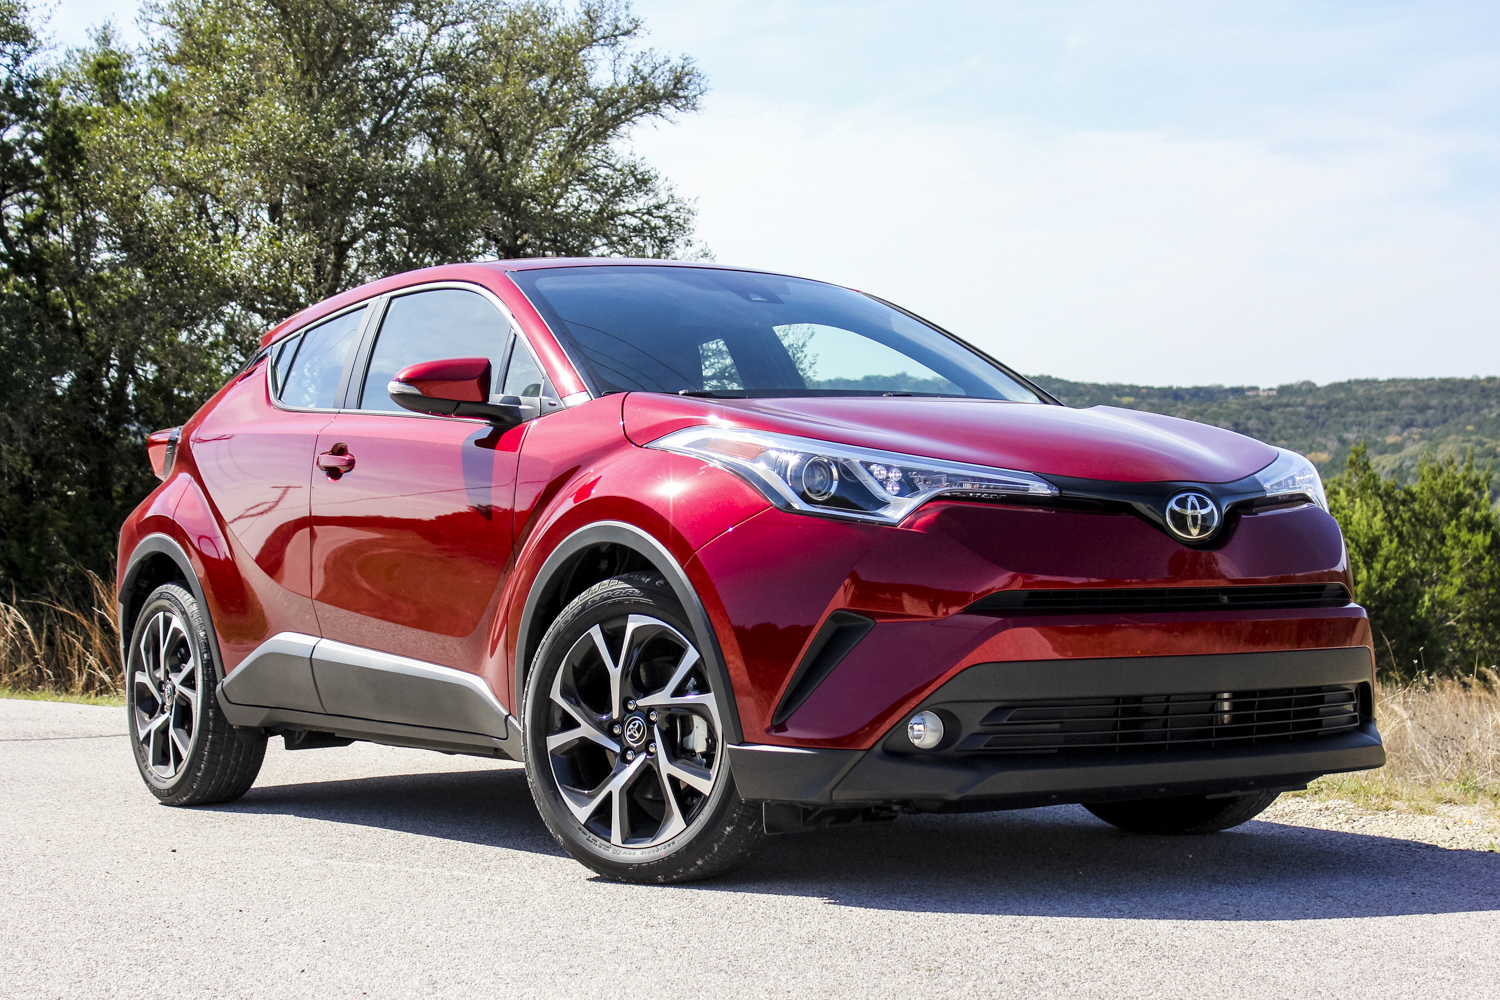 2018 toyota c hr first drive review firstdrive 000144